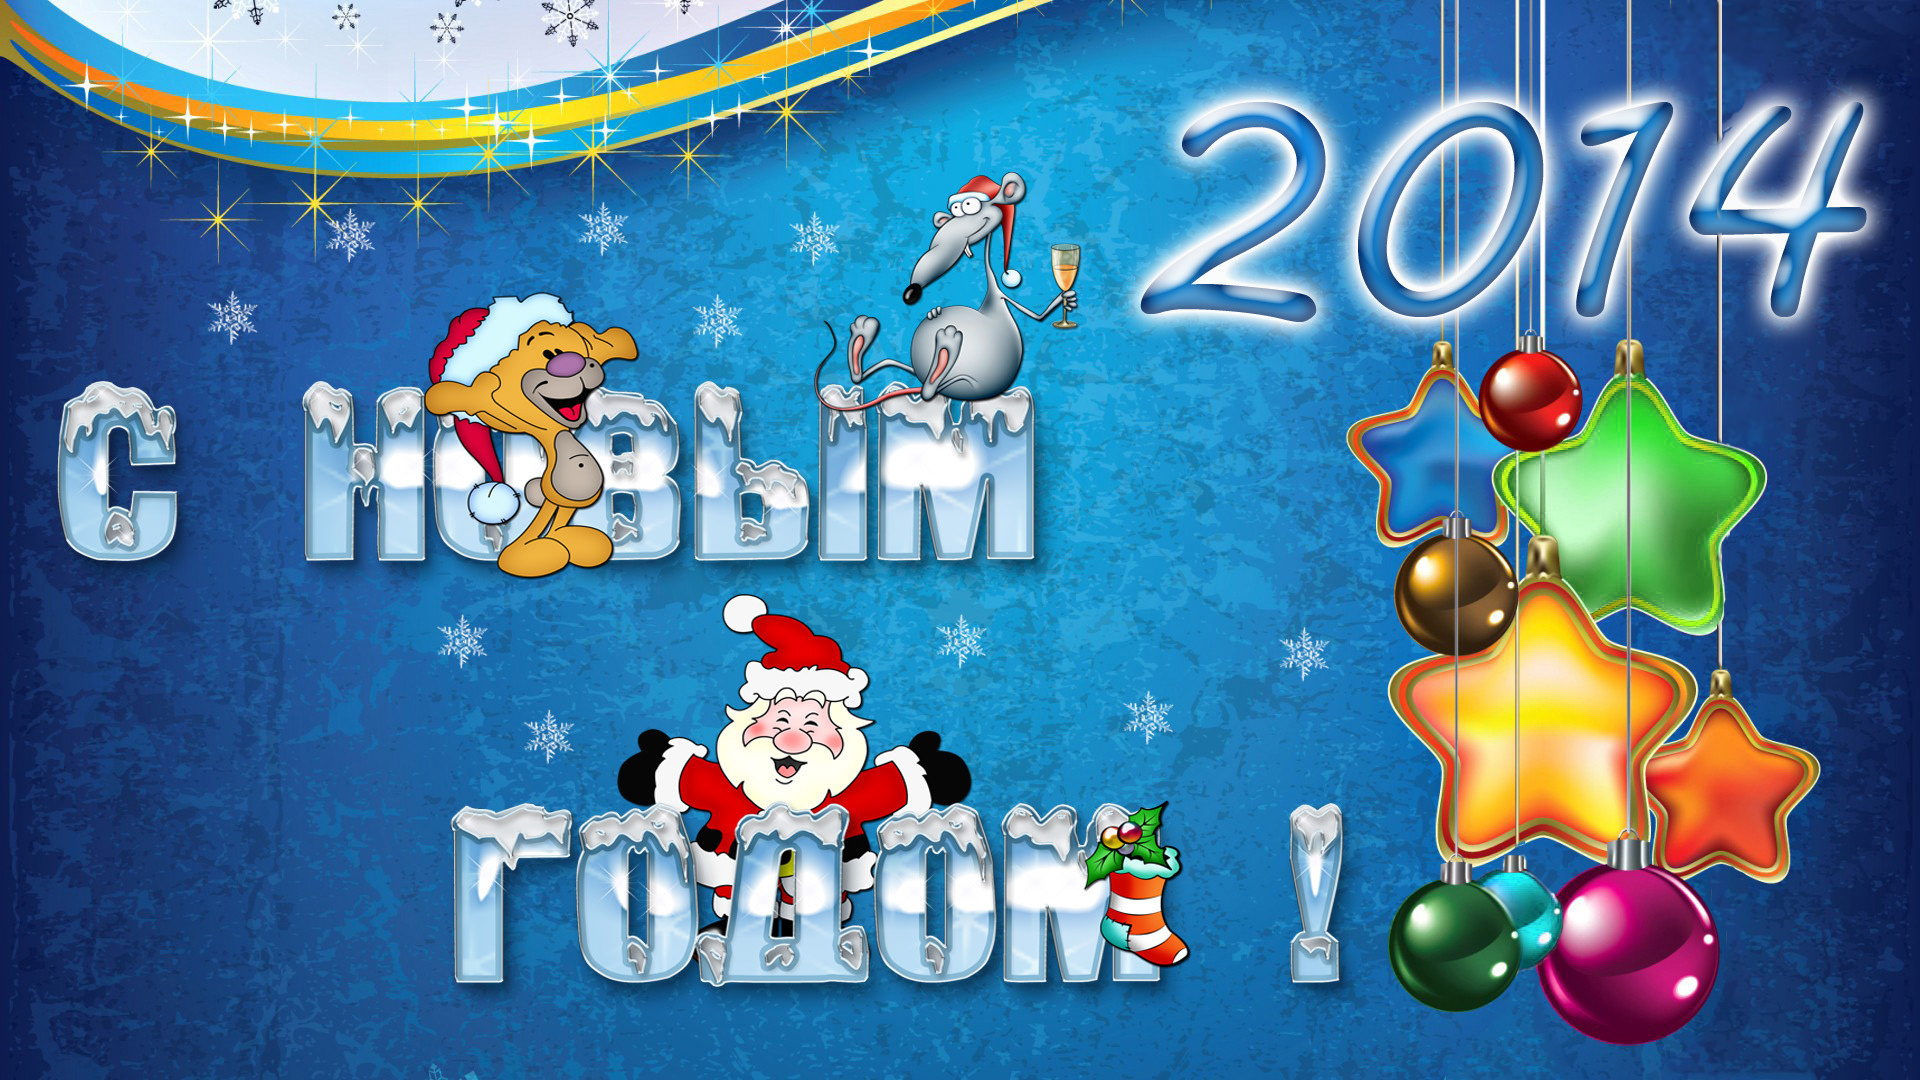 Wallpapers 2014 inscription happy new year on the desktop